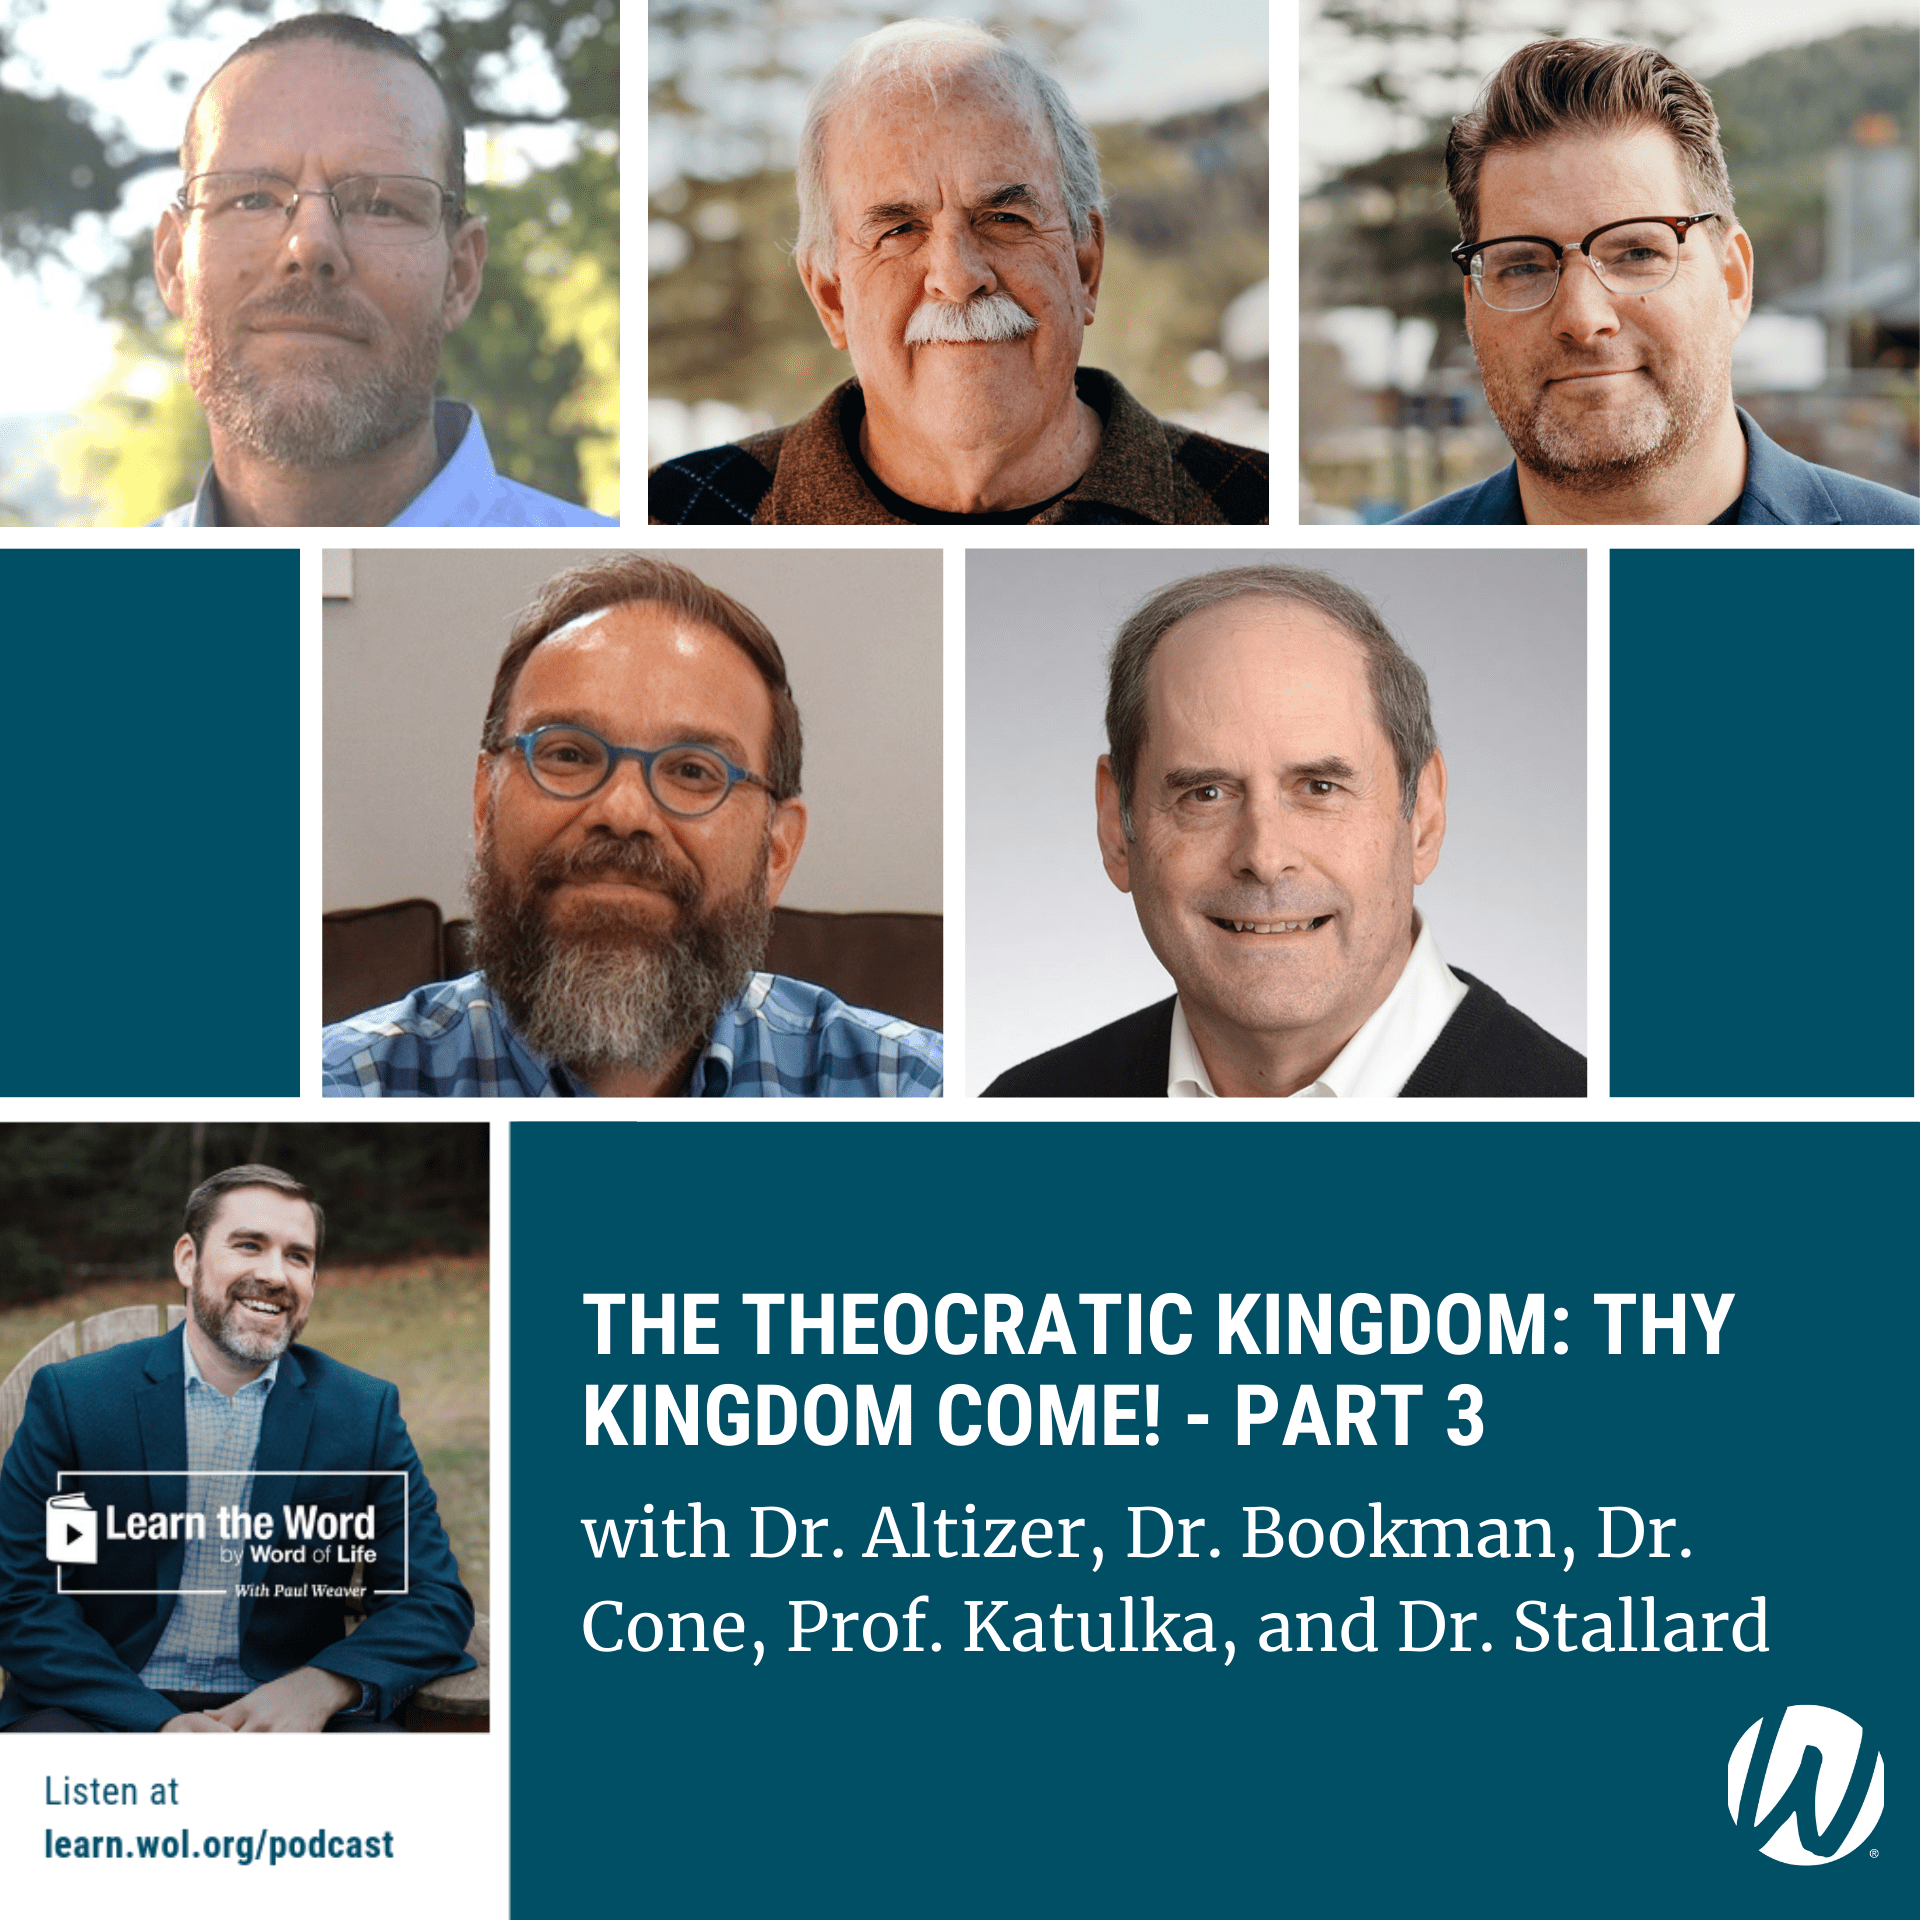 LTW 189 - The Theocratic Kingdom: Thy Kingdom Come! - Part 3 -with Dr. Altizer, Dr. Bookman, Dr. Cone, Prof. Katulka, and Dr. Stallard